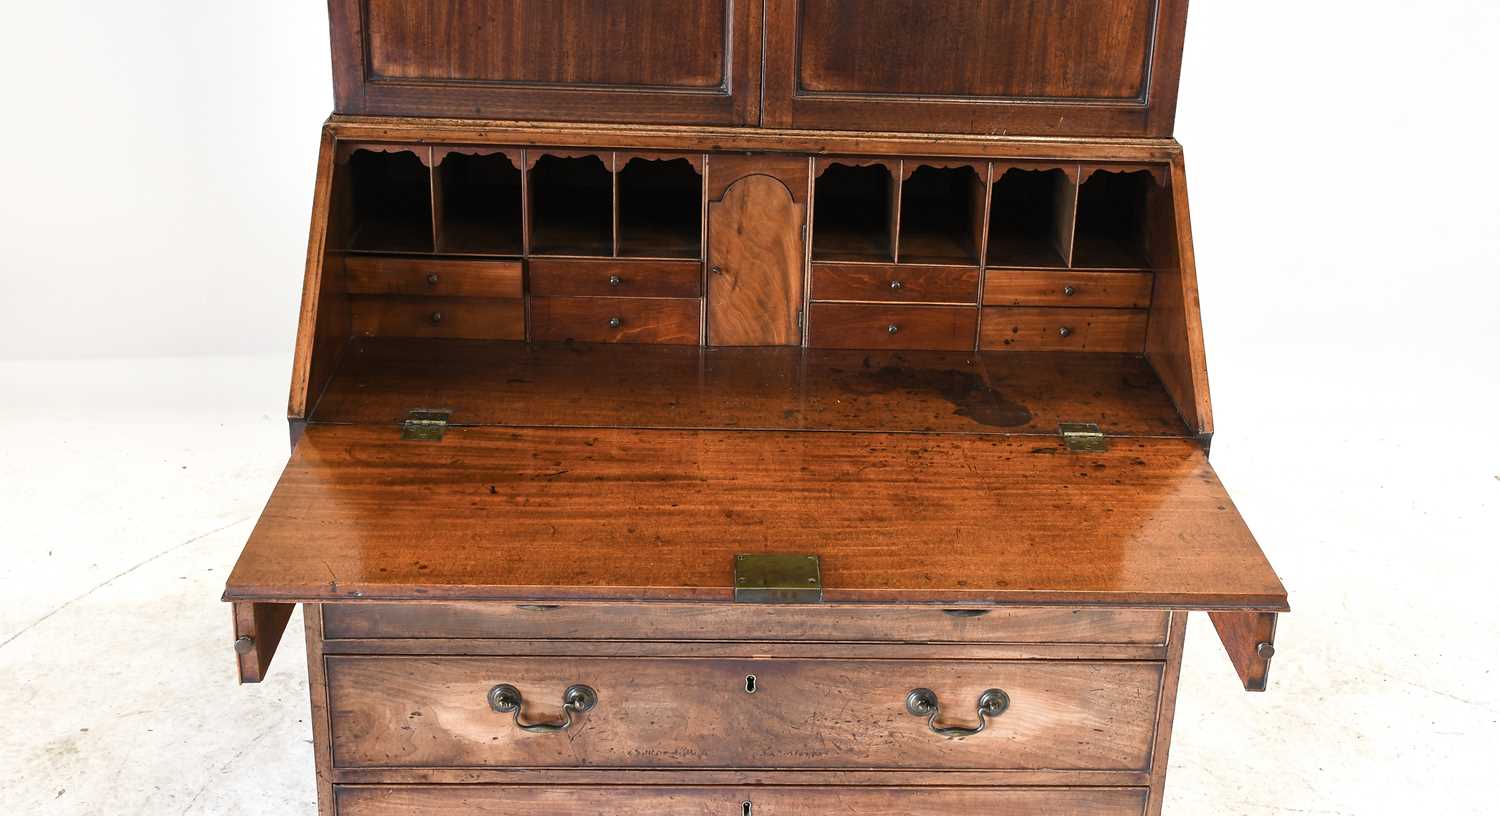 A George III Mahogany Bureau Bookcase, late 18th century, the upper section with architectural - Image 2 of 2